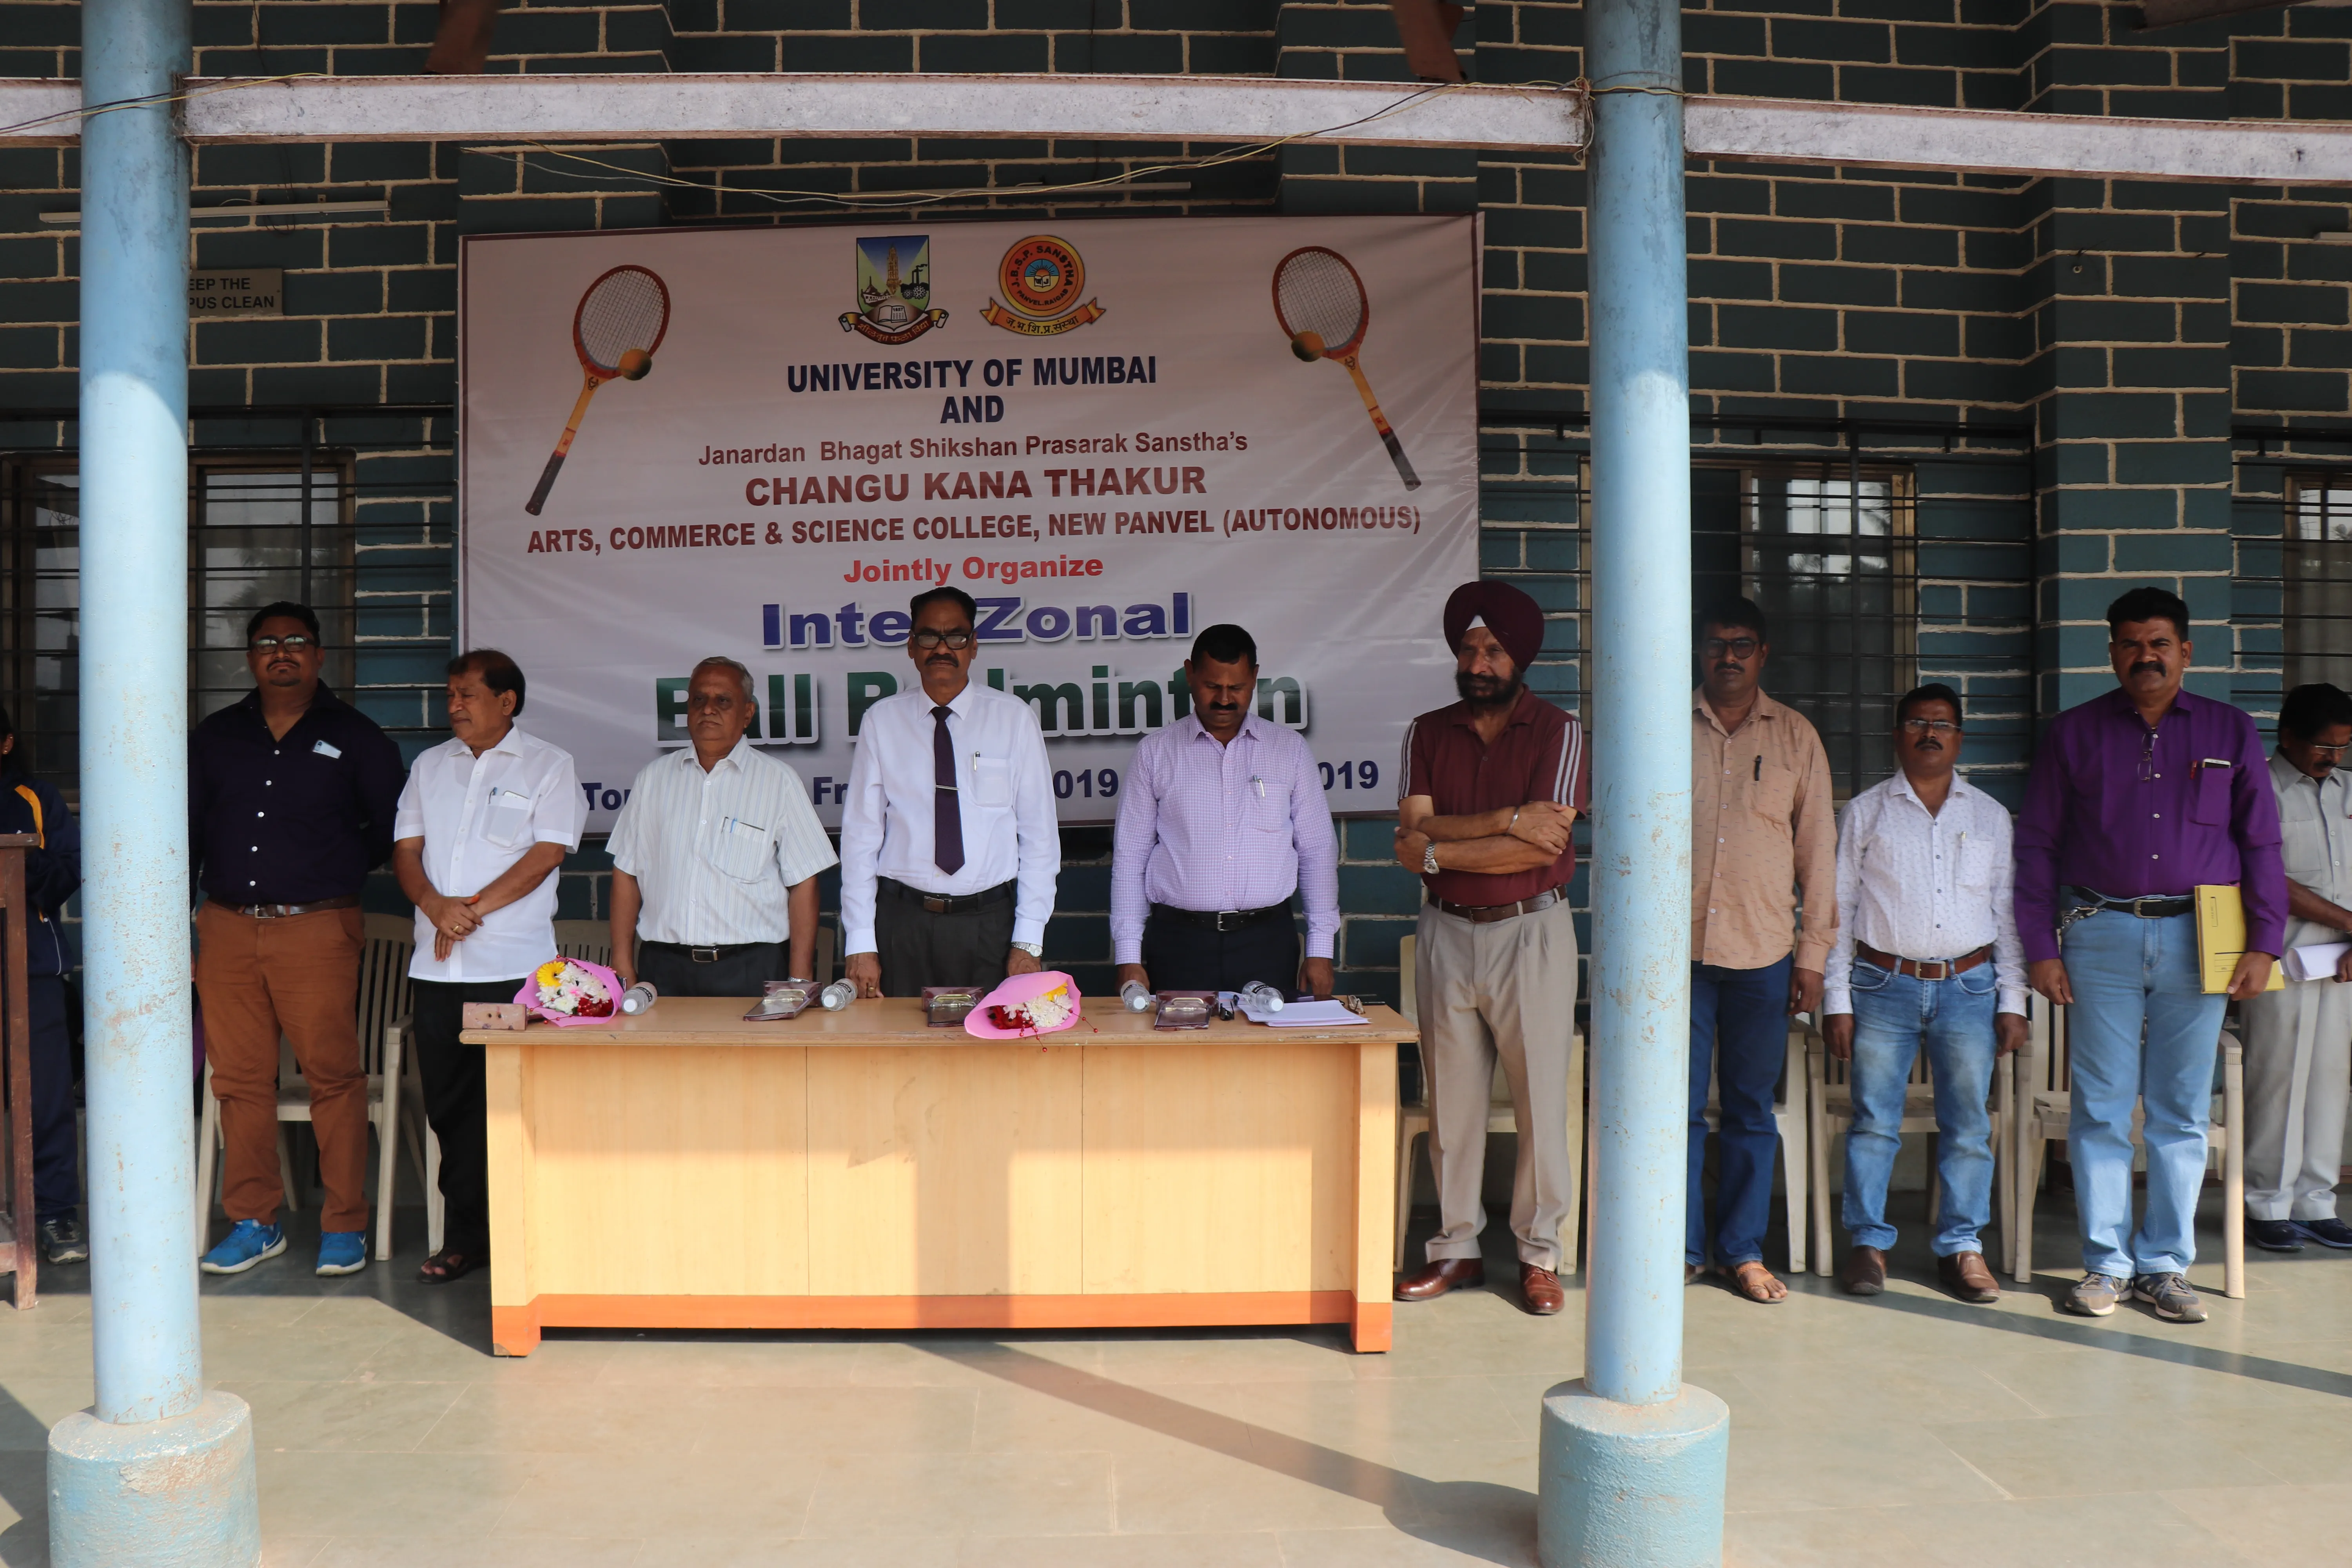 Organization of Interzonal Ball Badminton Commpetition 2019-20